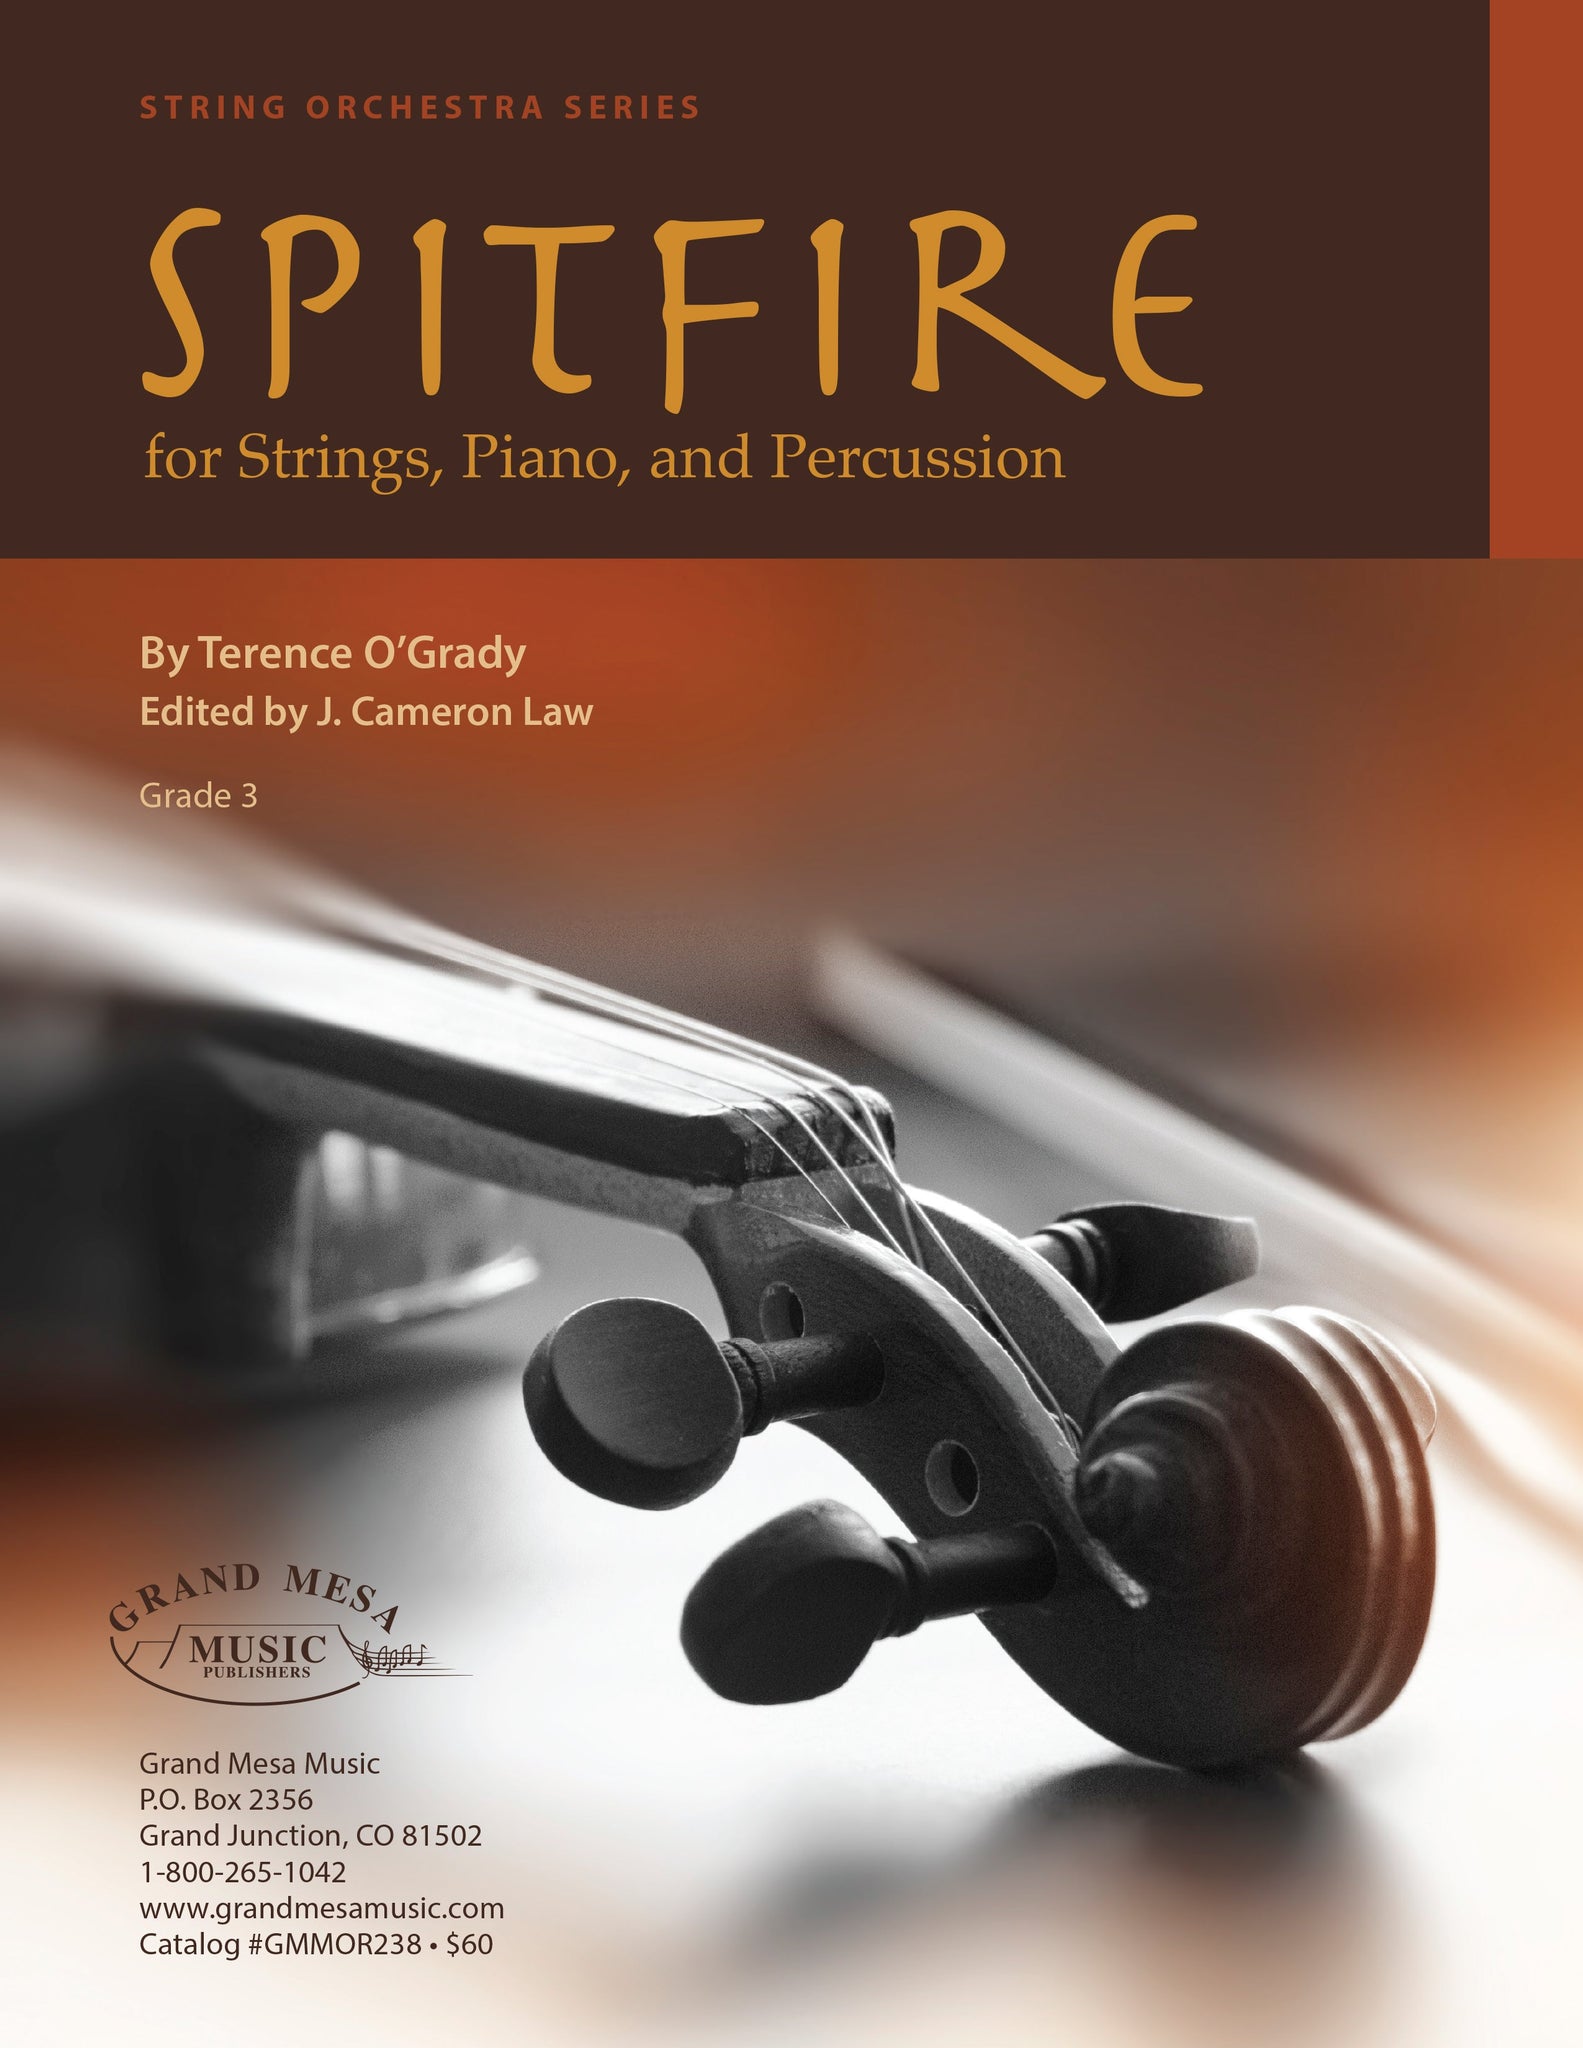 Strings sheet music cover of Spitfire, composed by Terence O'Grady.